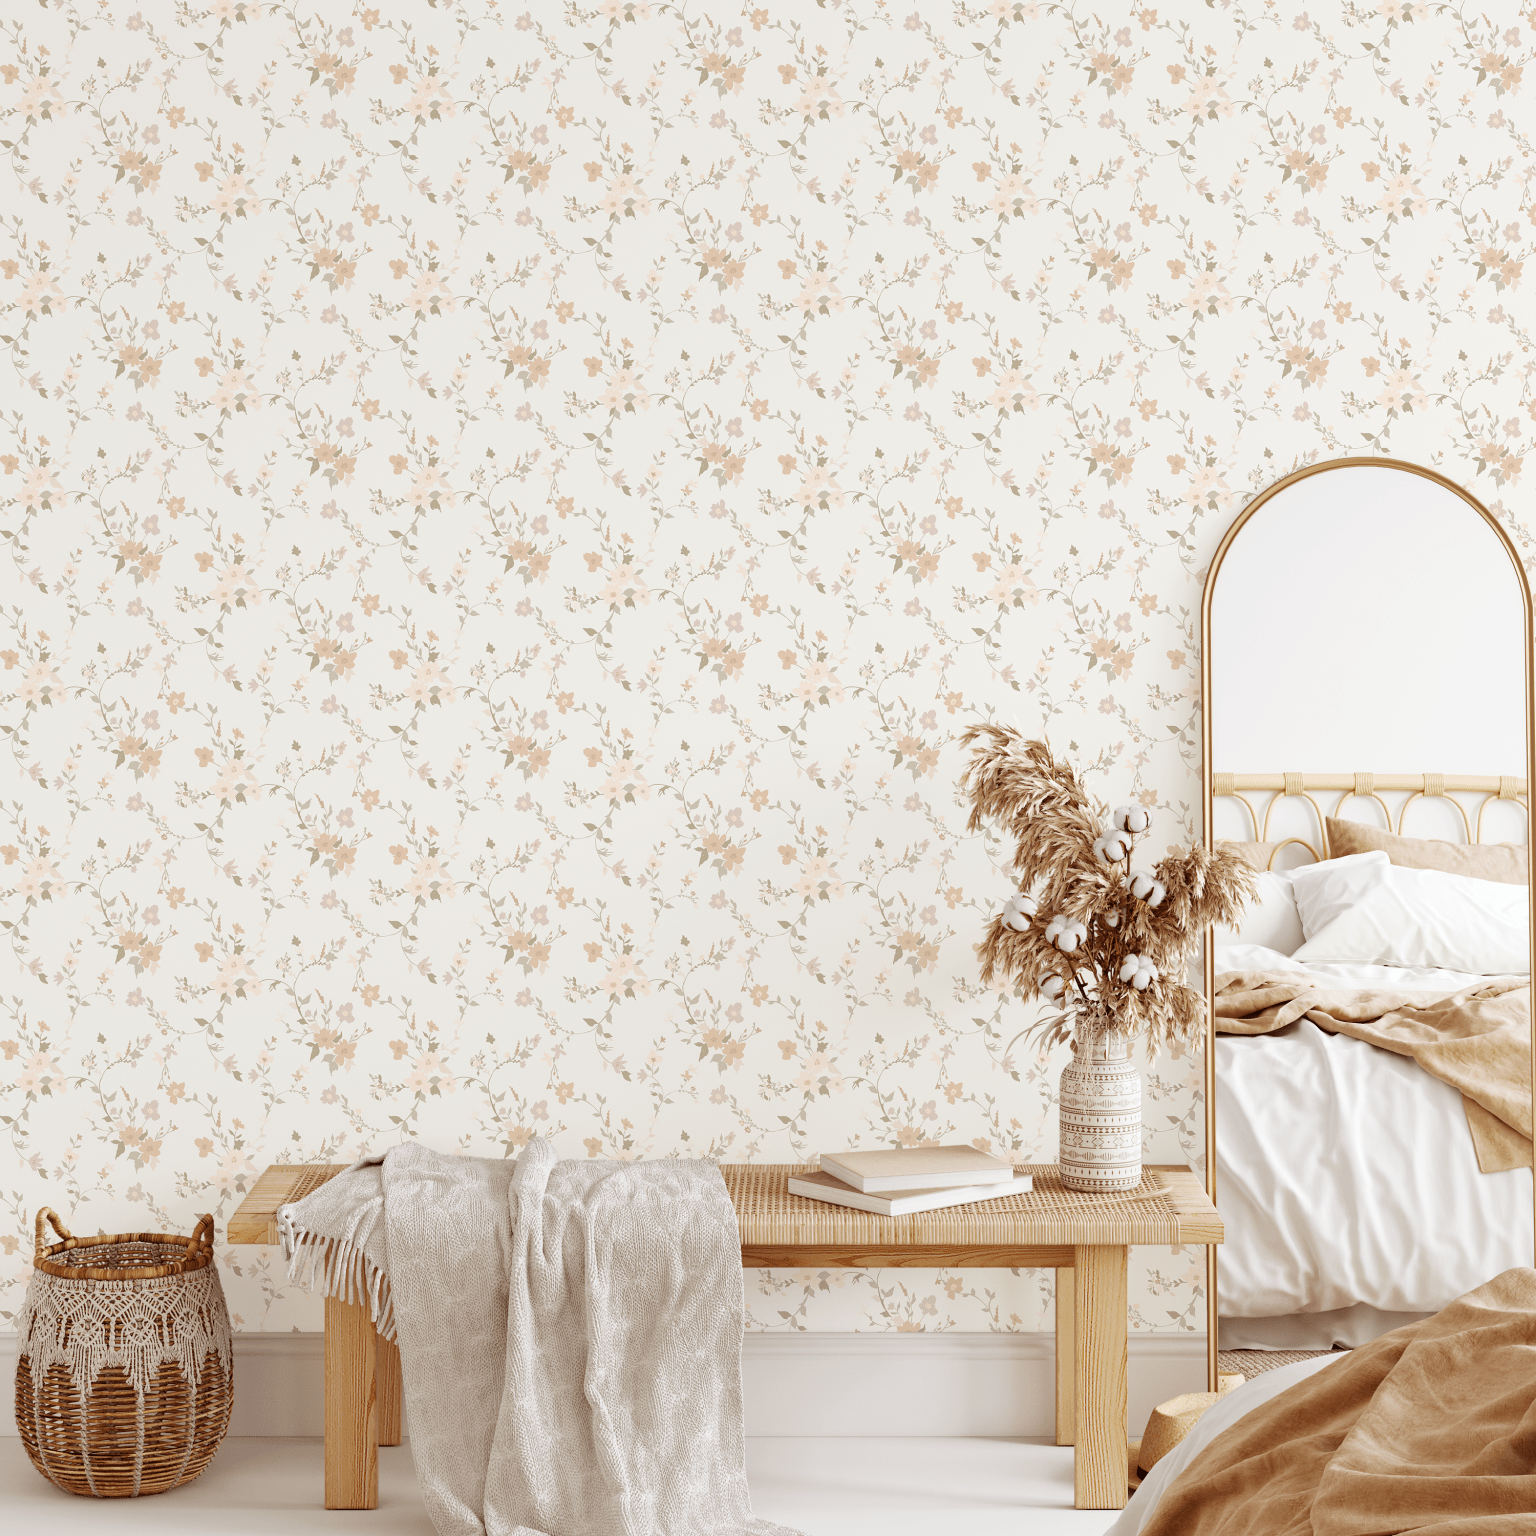 Bedroom with whimsical blossom peel and stick wallpaper in a soft, neutral palette complementing a cozy bed and bench.